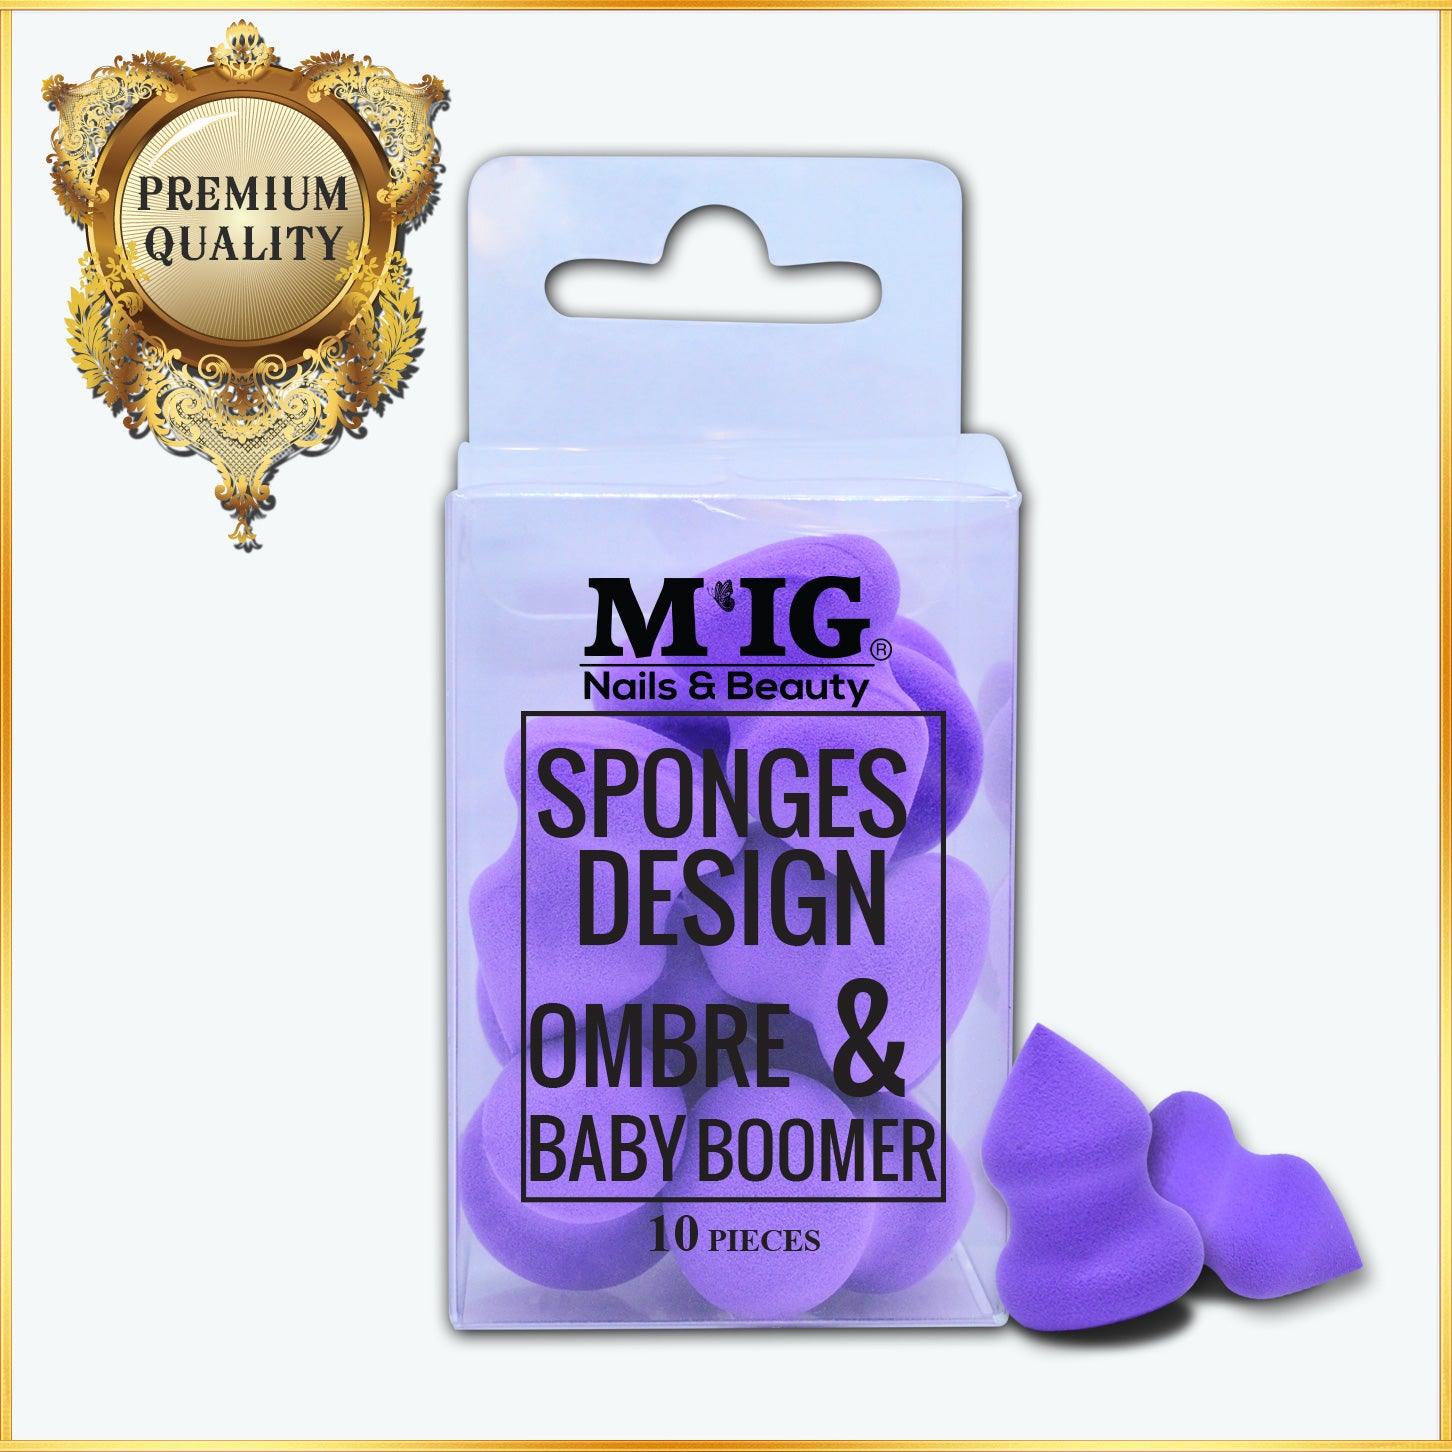 Sponges Design Ombre & Baby Boomer - MIGSHOP.RO